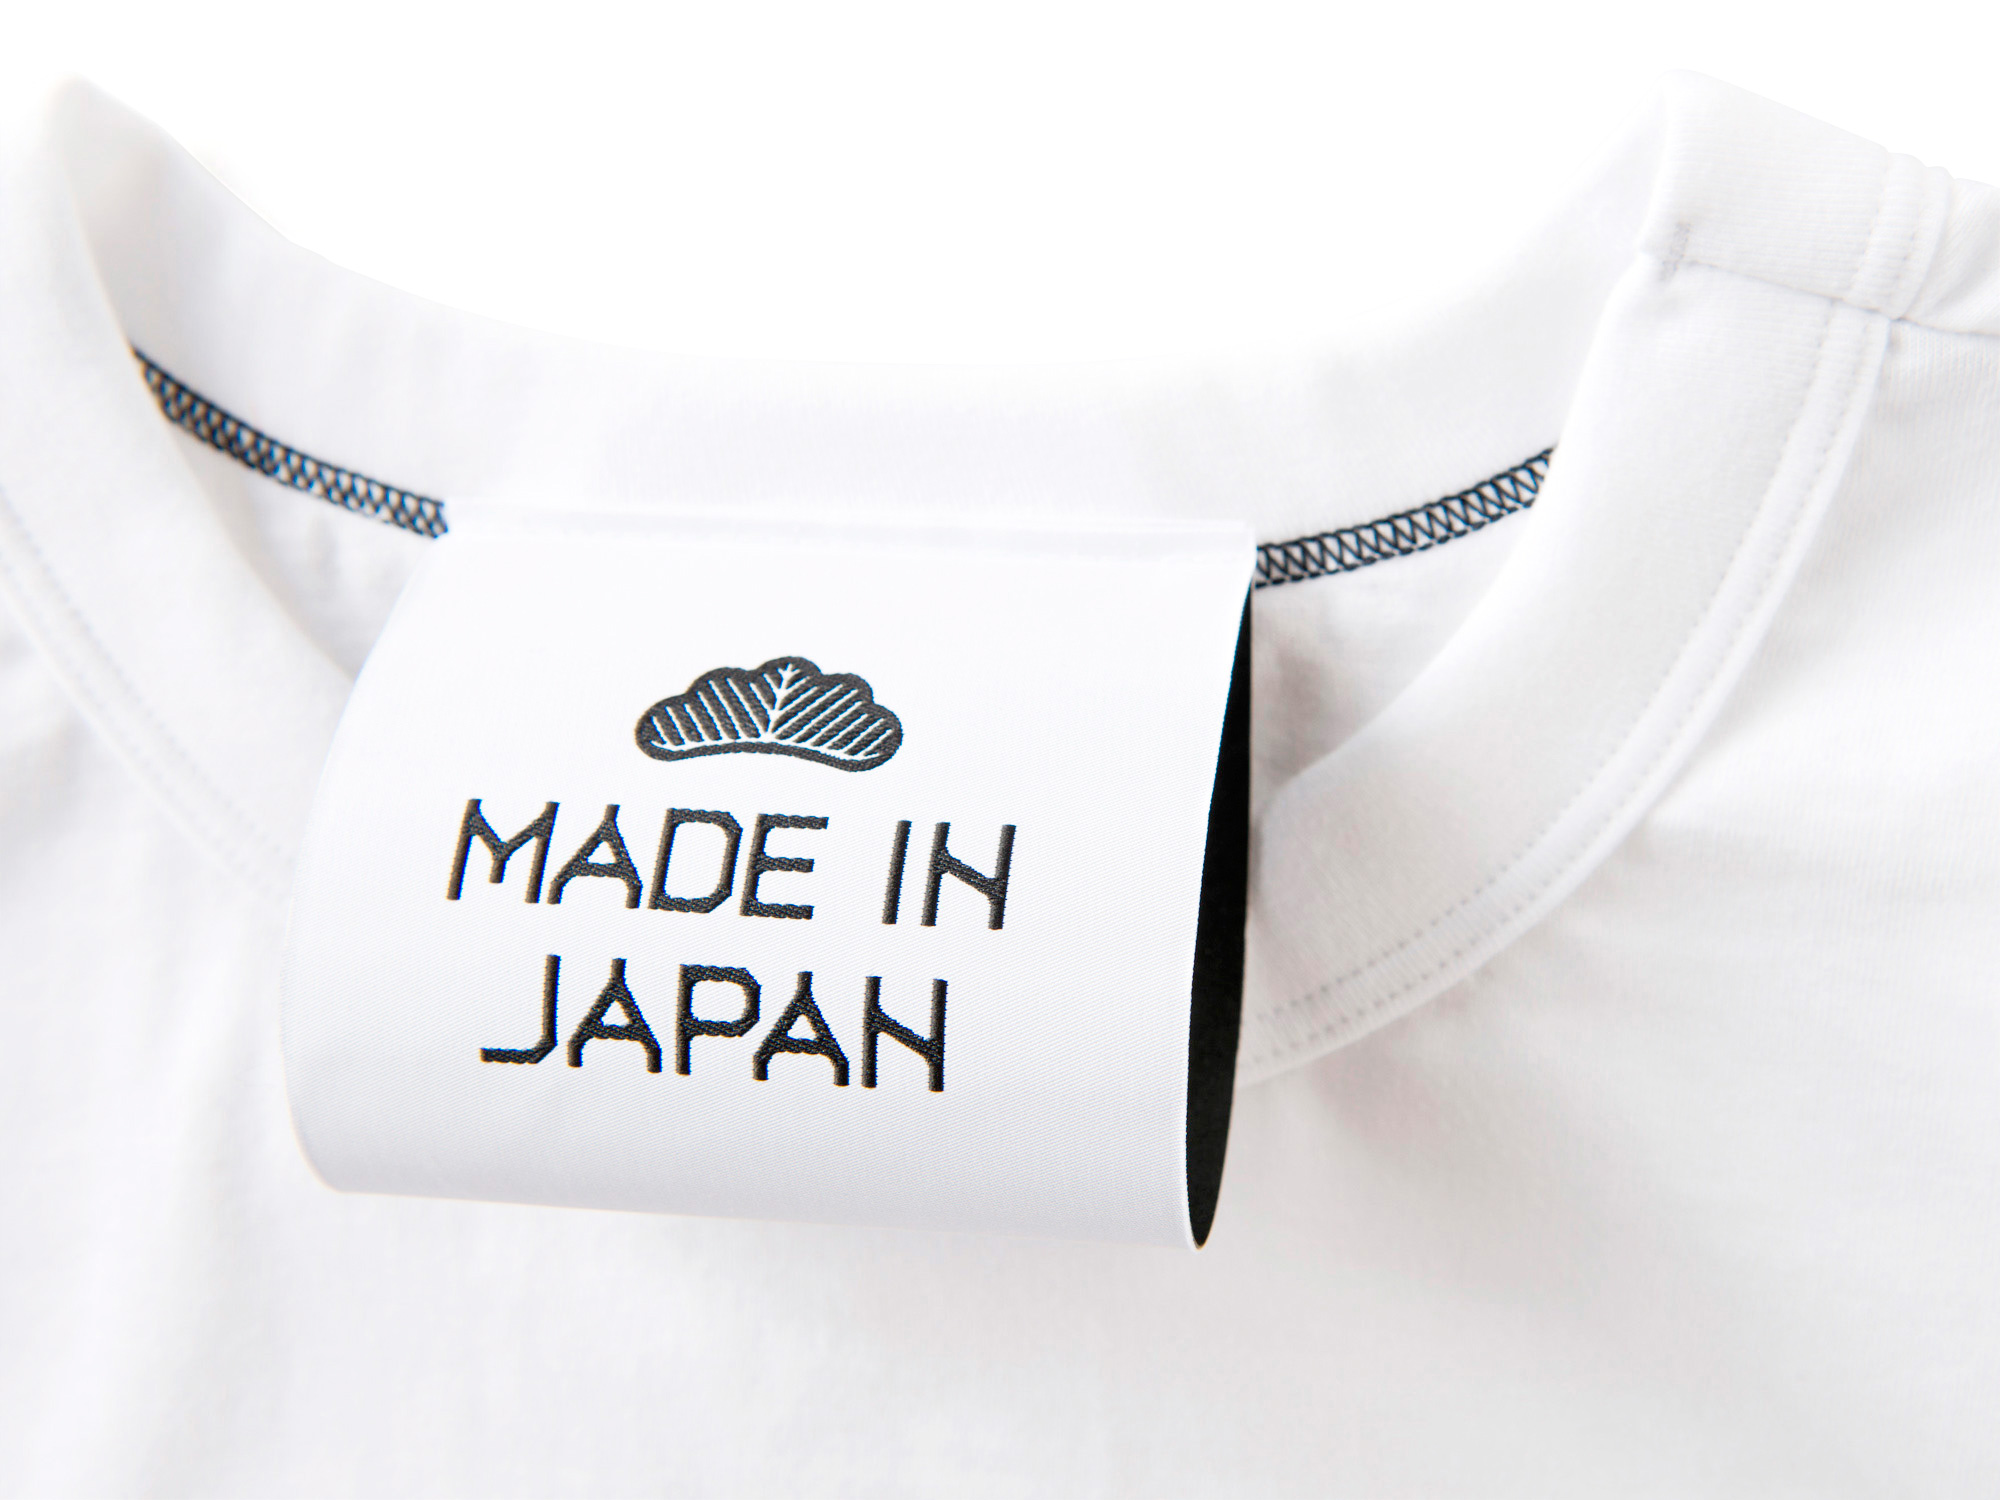 Established 1935<br />
The high-quality "tube-type" T-shirt from the first T-shirt maker in Japan